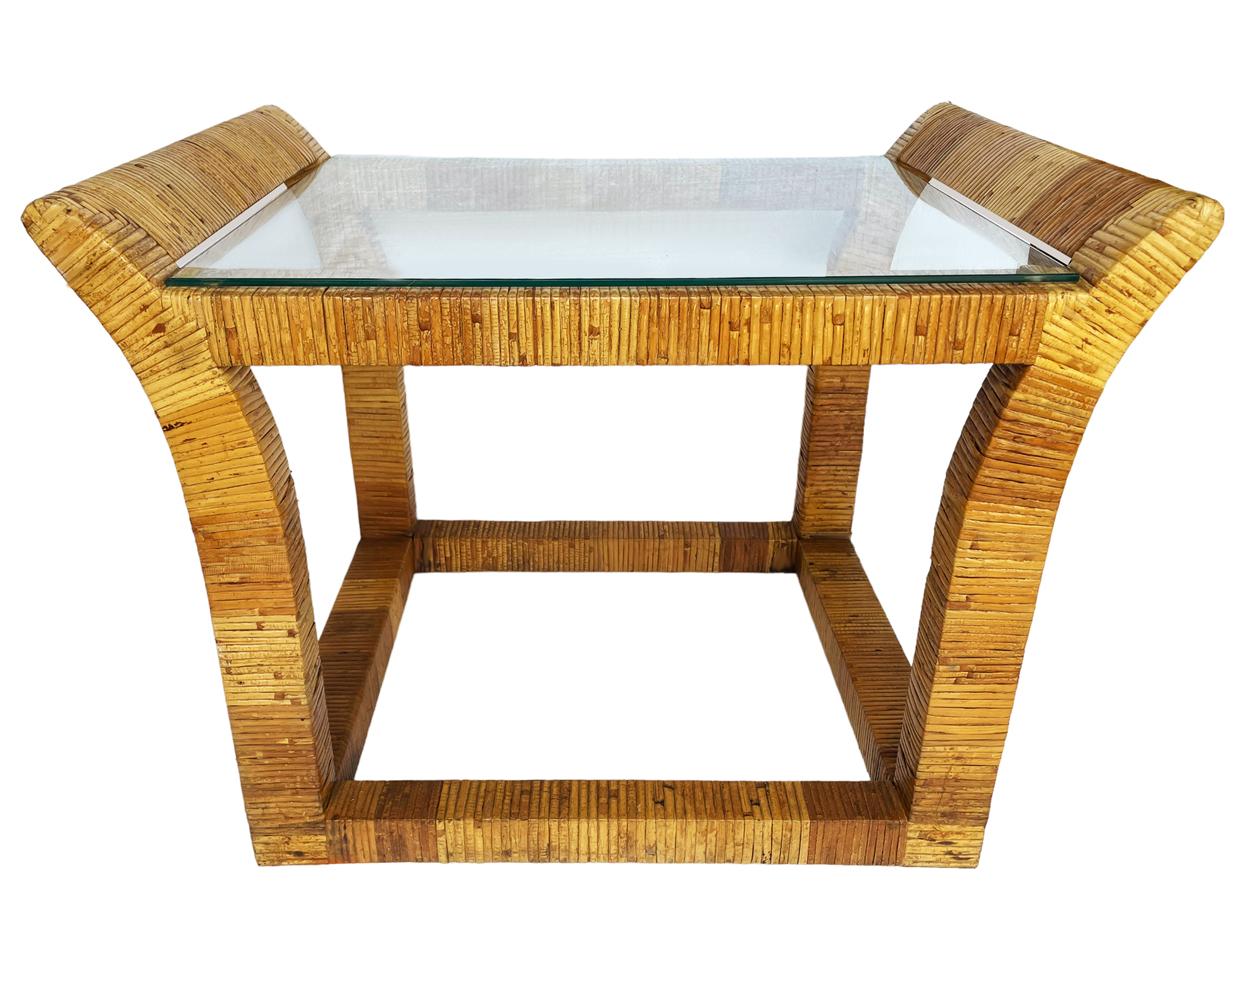 A matching pair of rattan tables that are funky cute & coastal modern. Heavy solid construction with clear inlayed glass. Very good ready to use condition. 